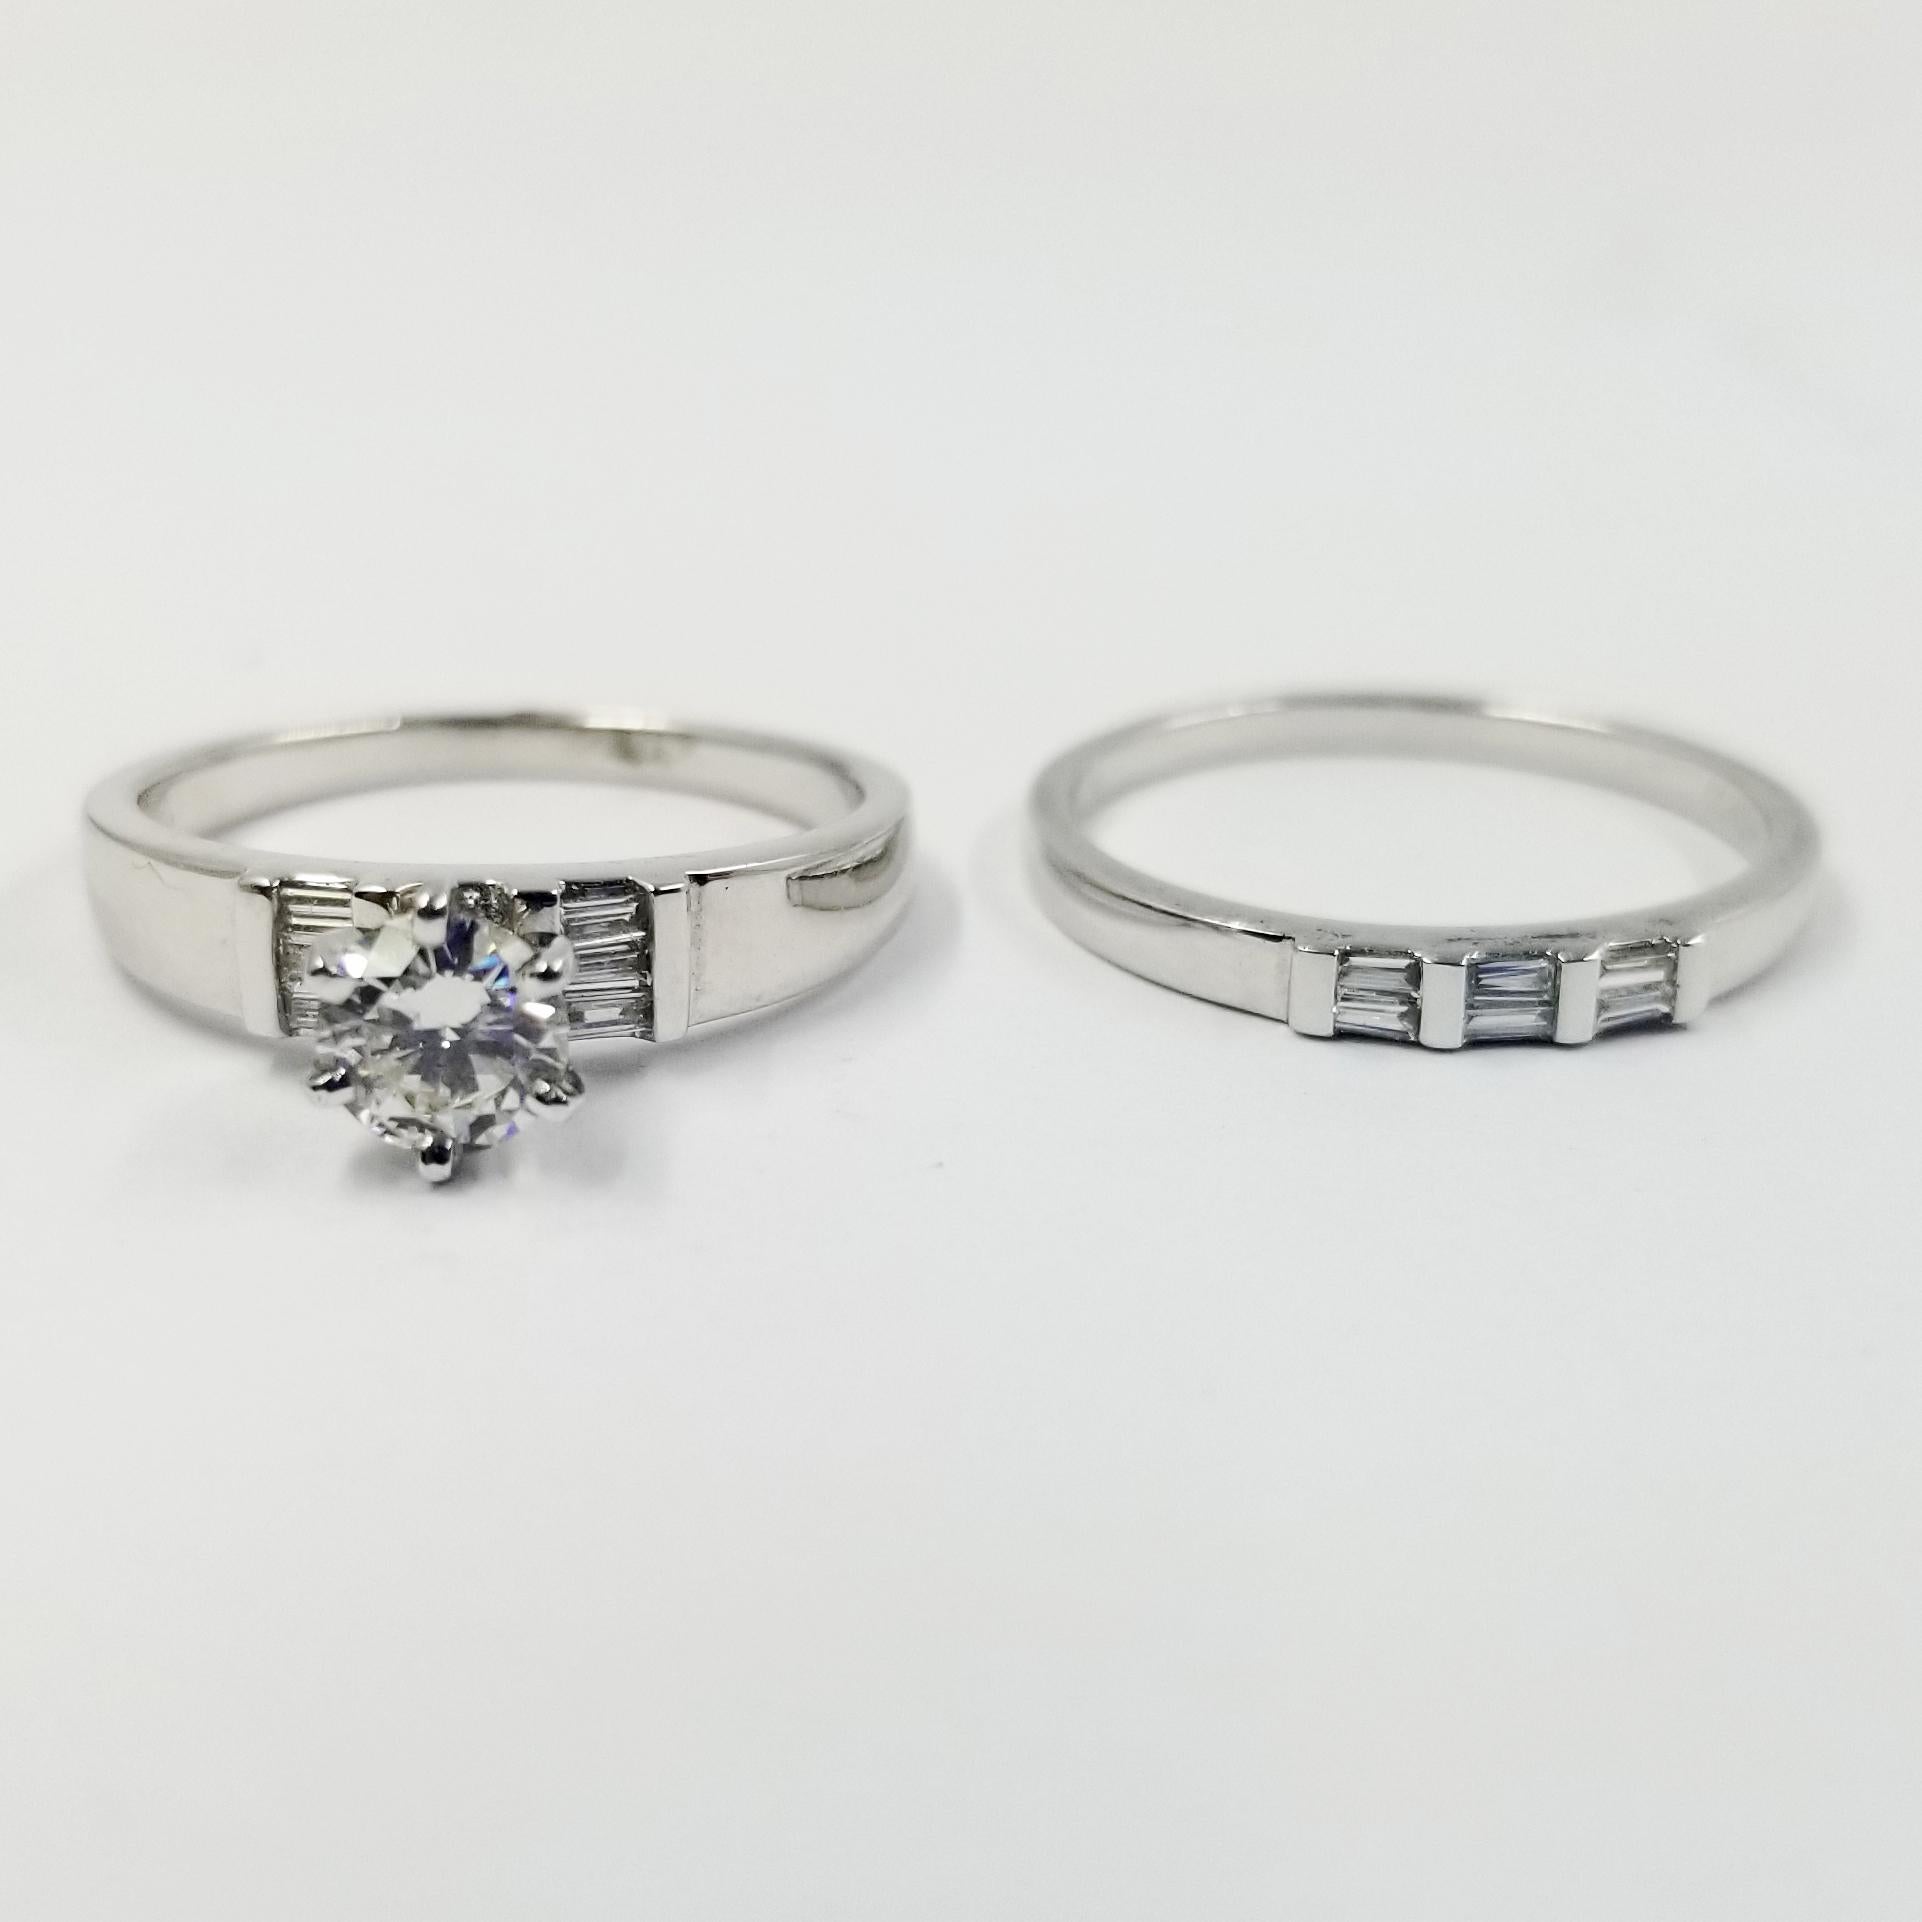 Platinum bridal set including an engagement ring and a wedding band. The engagement ring features a round brilliant cut diamond weighing exactly 0.40 carat that is GIA graded as VS1 clarity & J color (report #2101584328) set in a 6 prong setting.